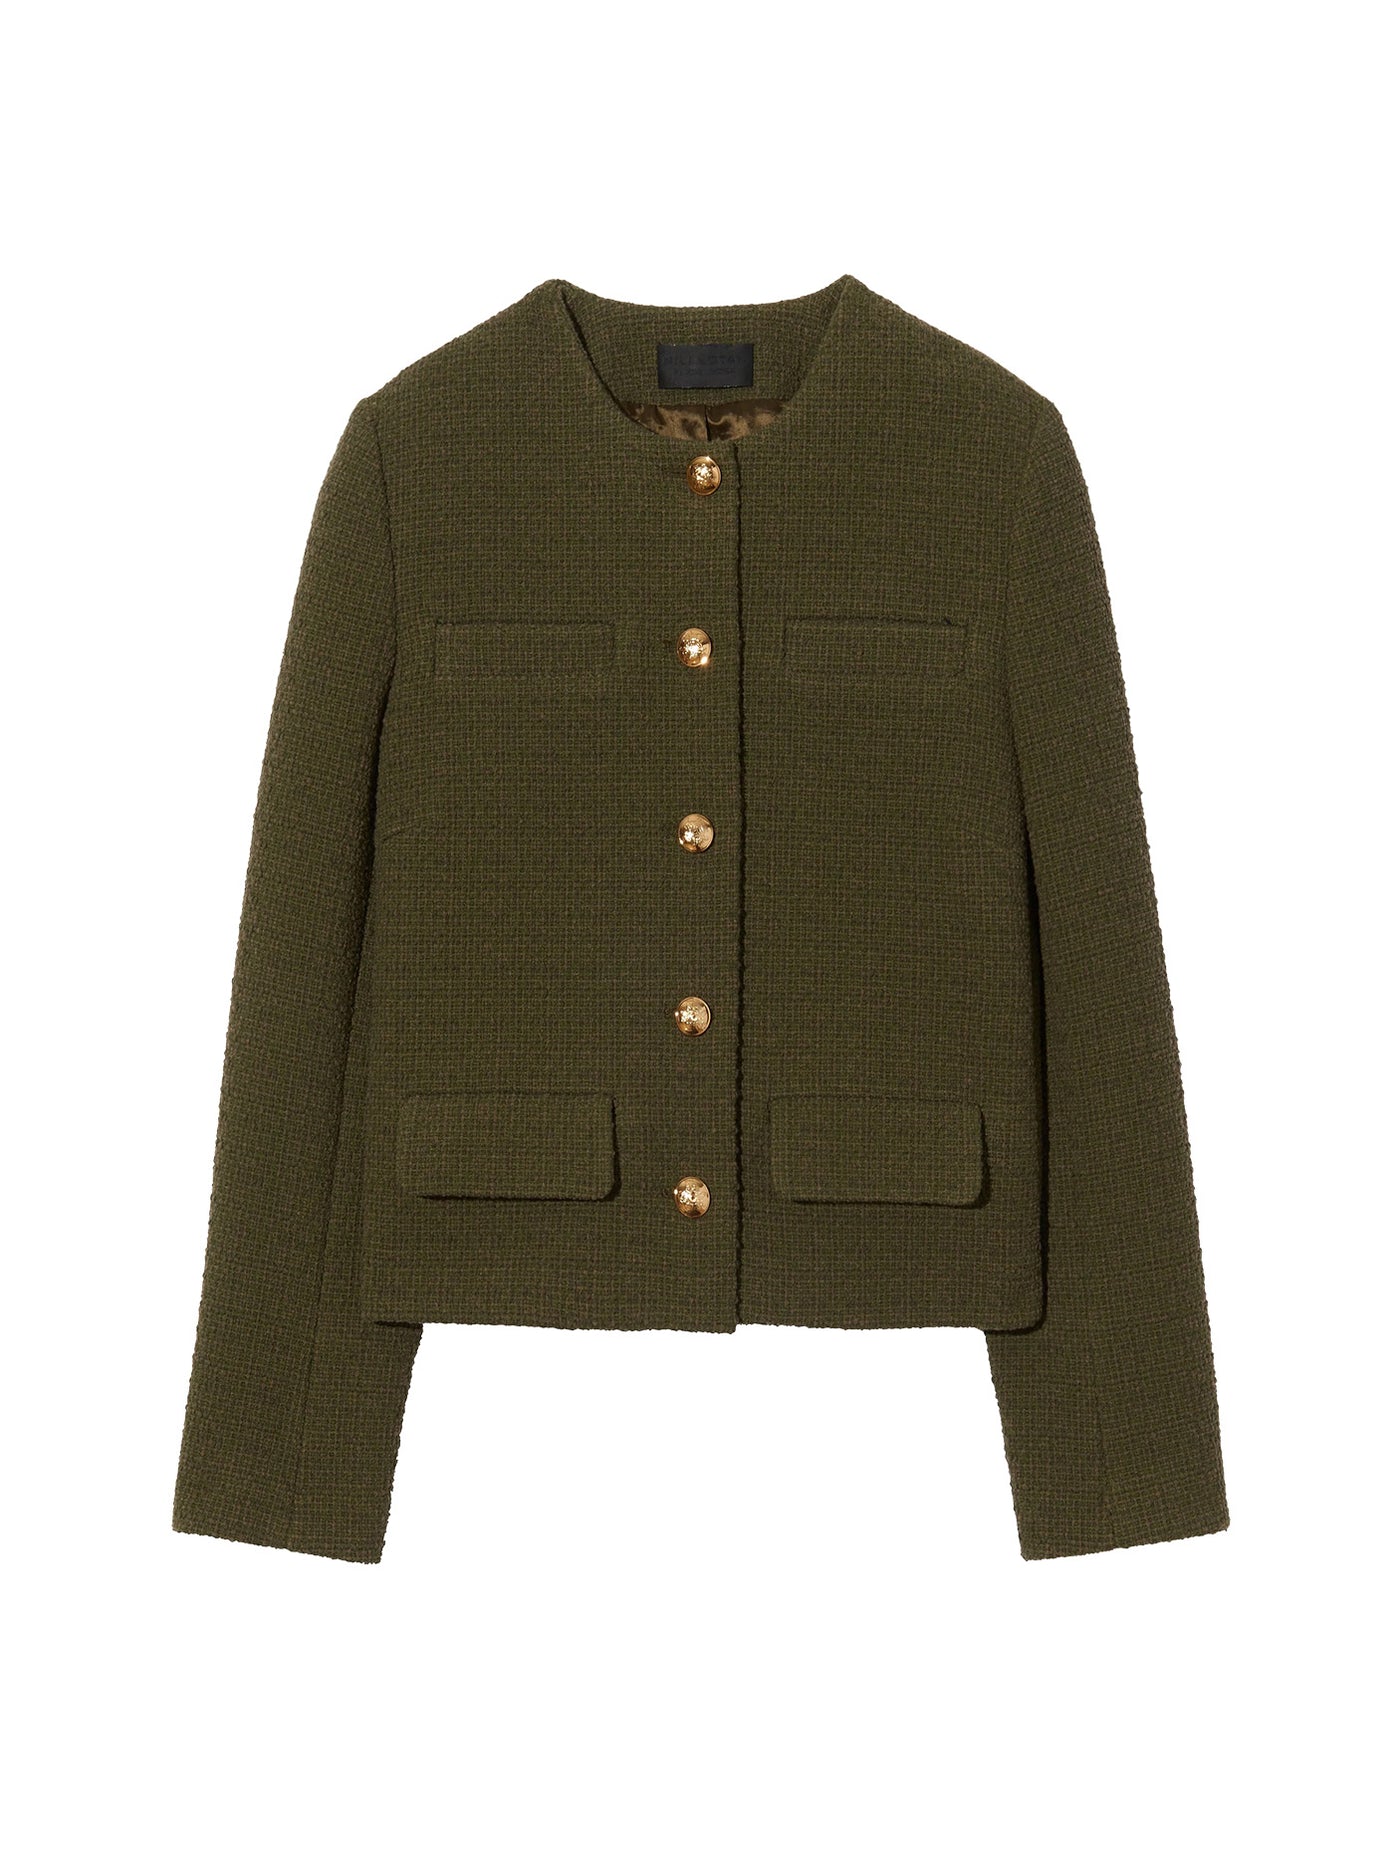 Paige Jacket in Army Green